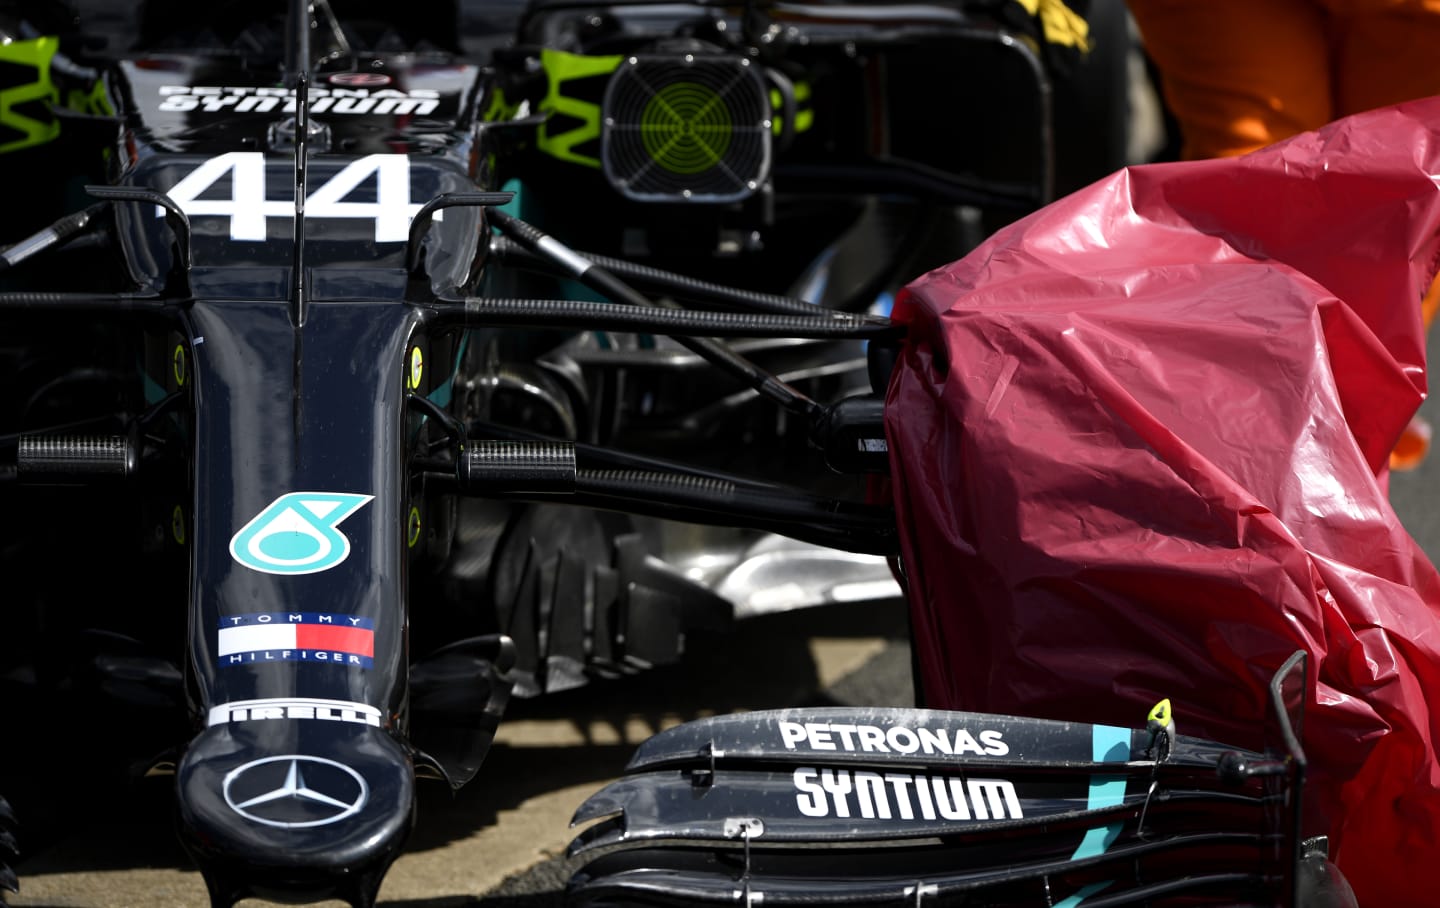 NORTHAMPTON, ENGLAND - AUGUST 02: The car of Lewis Hamilton of Great Britain and Mercedes GP is